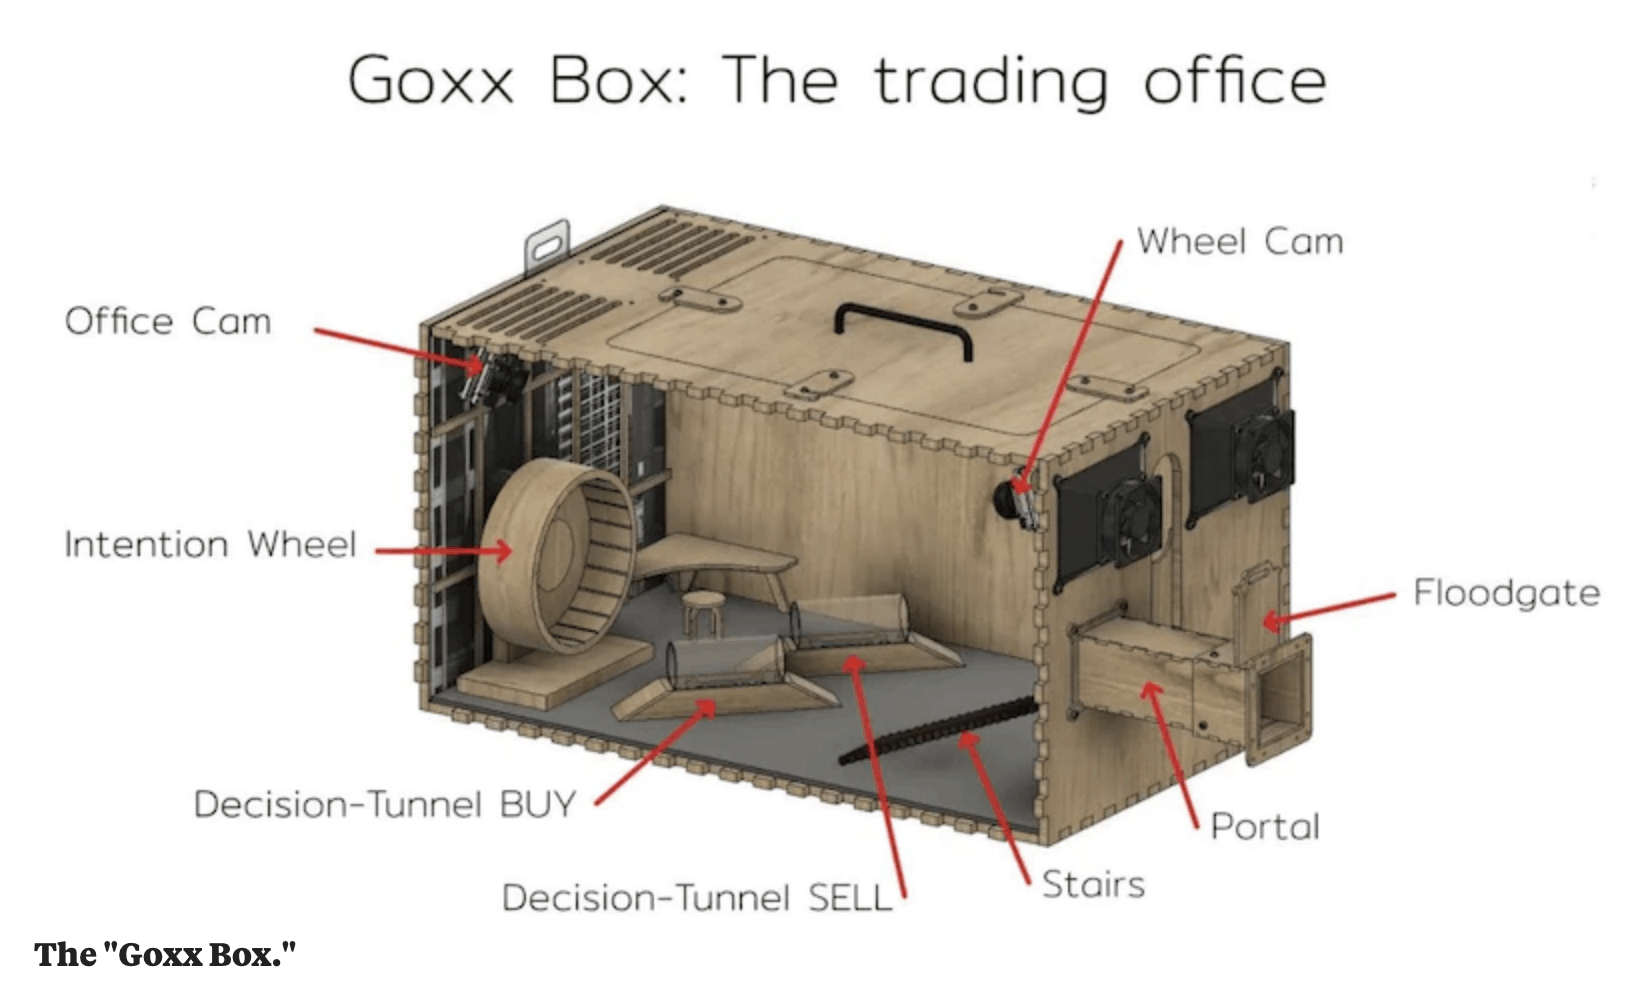 Goxx box trading office for a hamster.